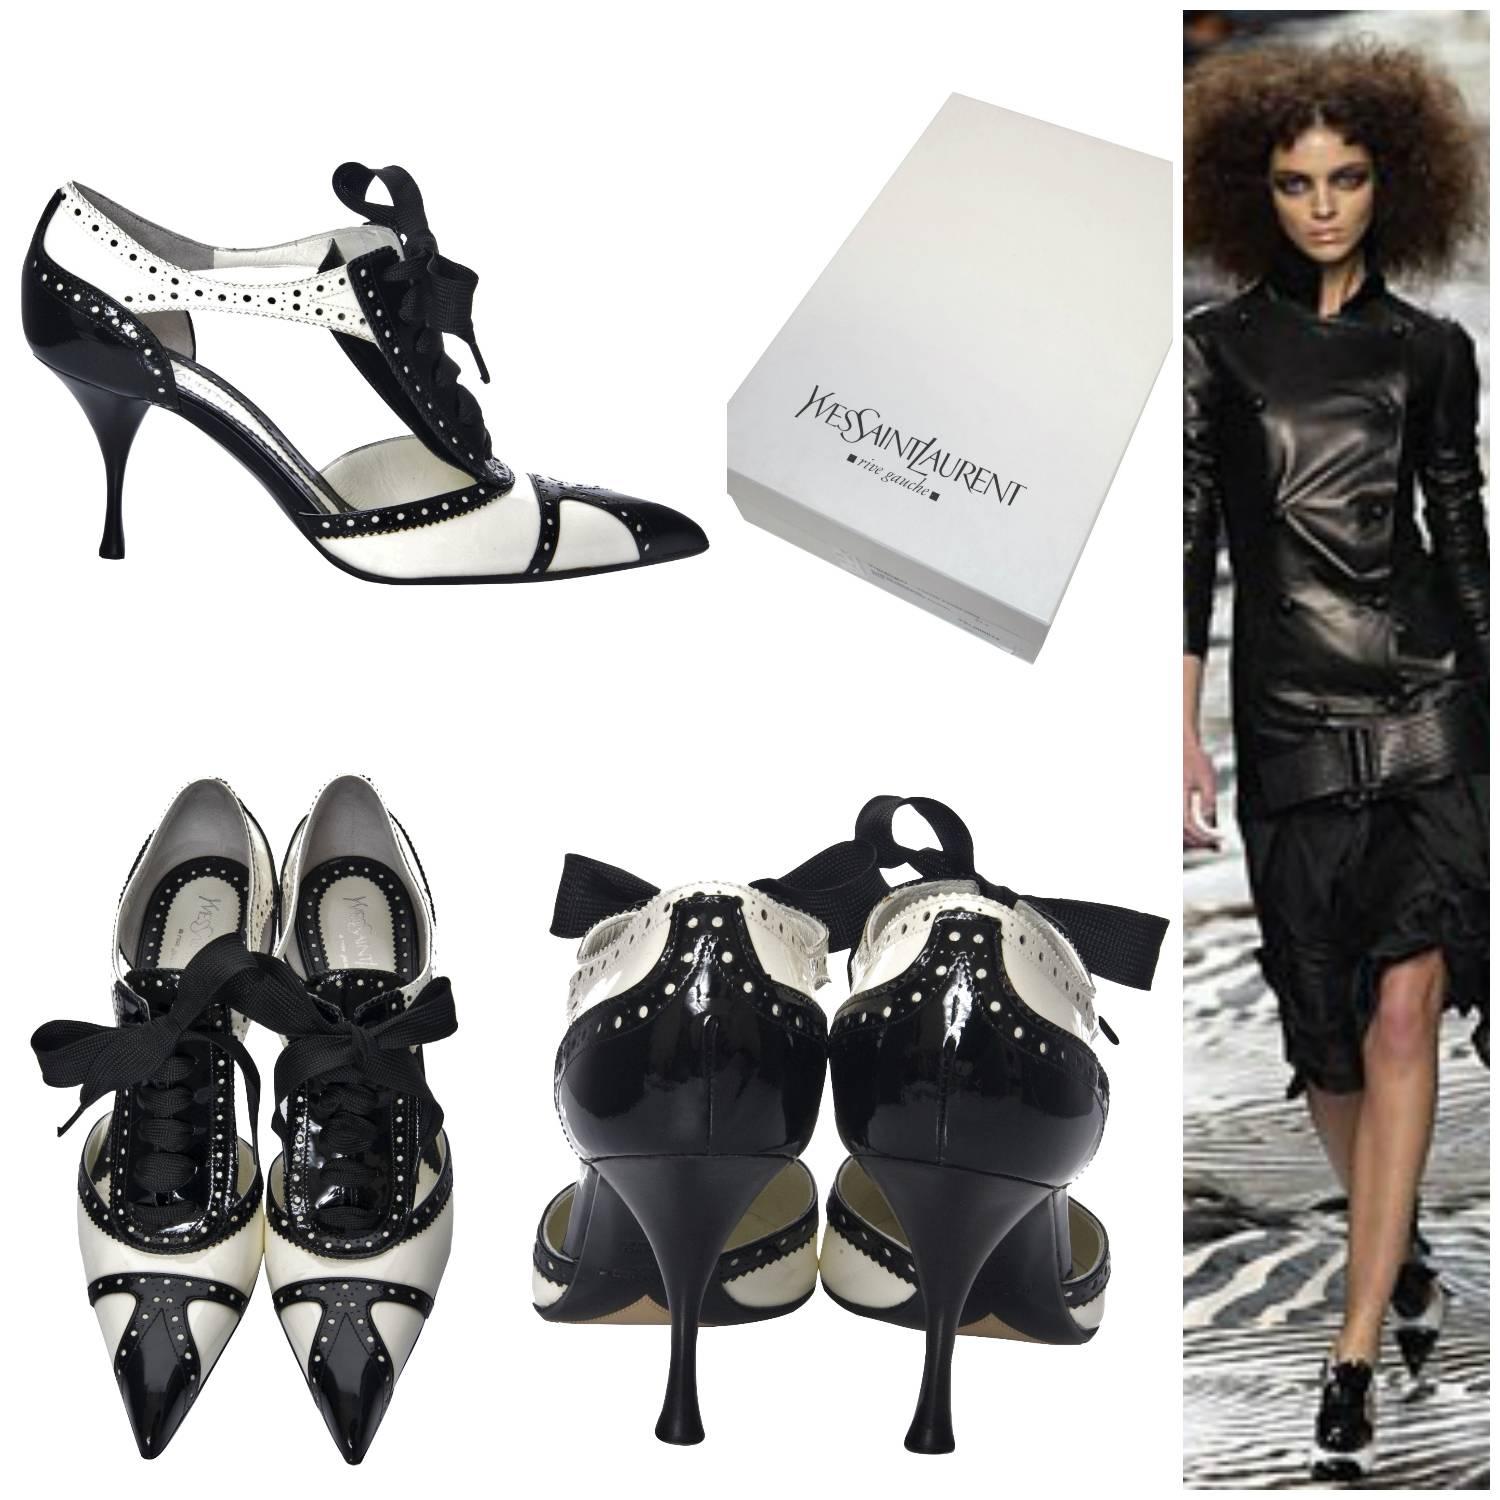 Tom Ford For YSL Heels
Rare & Collectible
Brand New
* Rare Tom Ford For YSL Runway Spectator Heels 
* Own a Piece of Fashion History!
* Black & Ivory Patent Pumps
* Size Euro: 39
* Lace up Tie
* Pointed Toe 
* Leather Insole
* 3